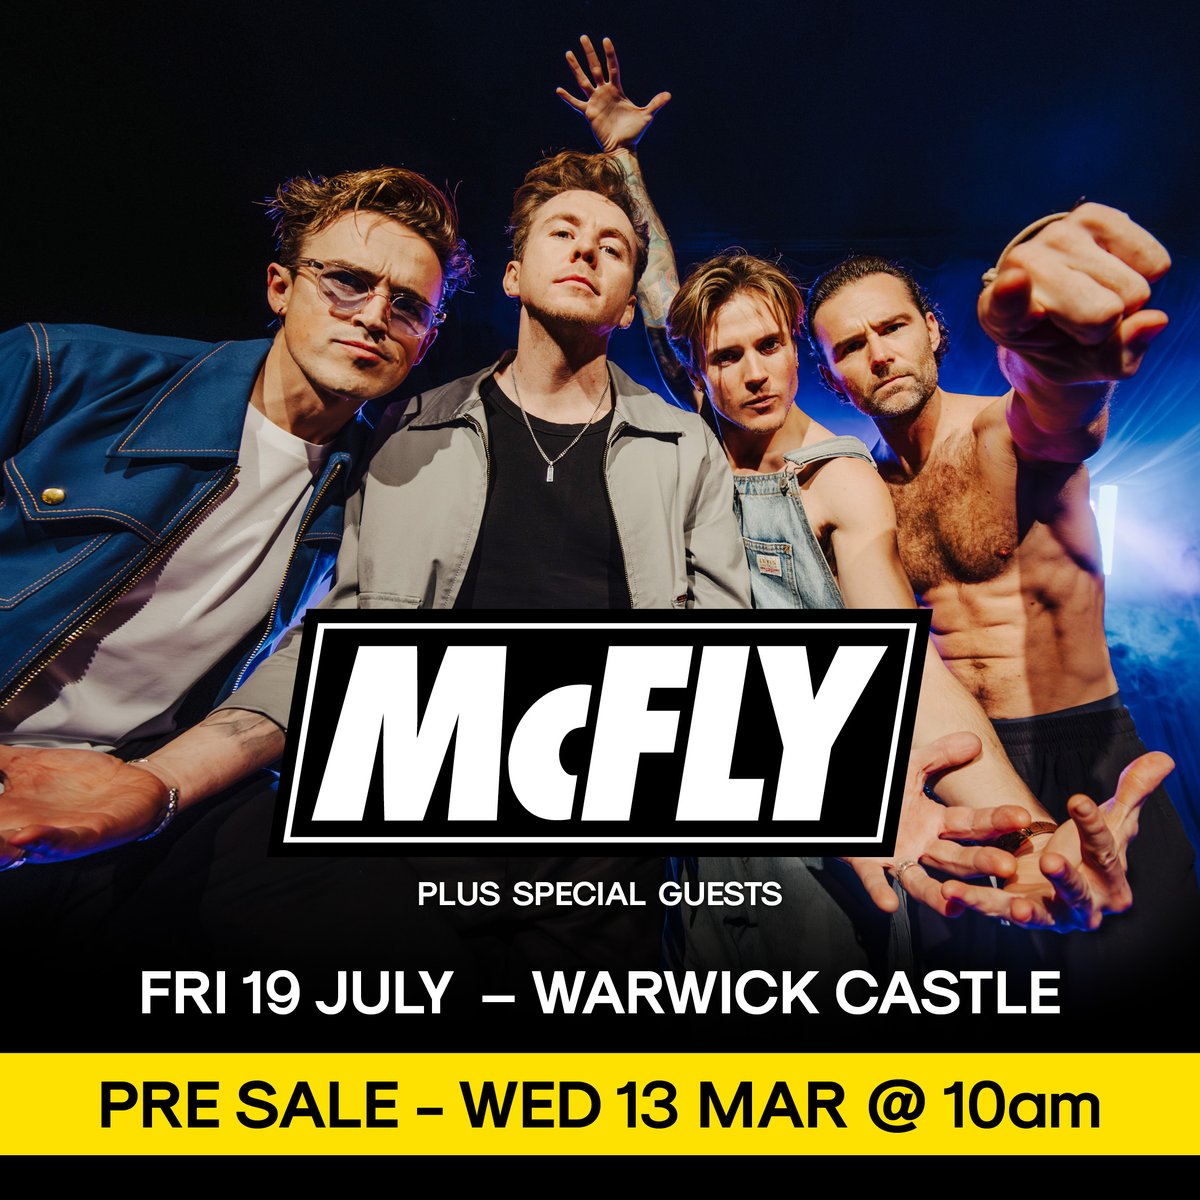 So wouldn’t you like to come with me? 
@mcflymusic 🎵 PRE SALE LIVE NOW @WarwickCastle 🏰 
Fri 19 Jul ‘24! ☀️ 

Tickets expected to sell out FAST! 🎟️ 💨 
GET YOURS TODAY BELOW!
#McFly #WarwickCastle #LiveAtWarwickCastle 

premier.ticketek.co.uk/shows/show.asp…